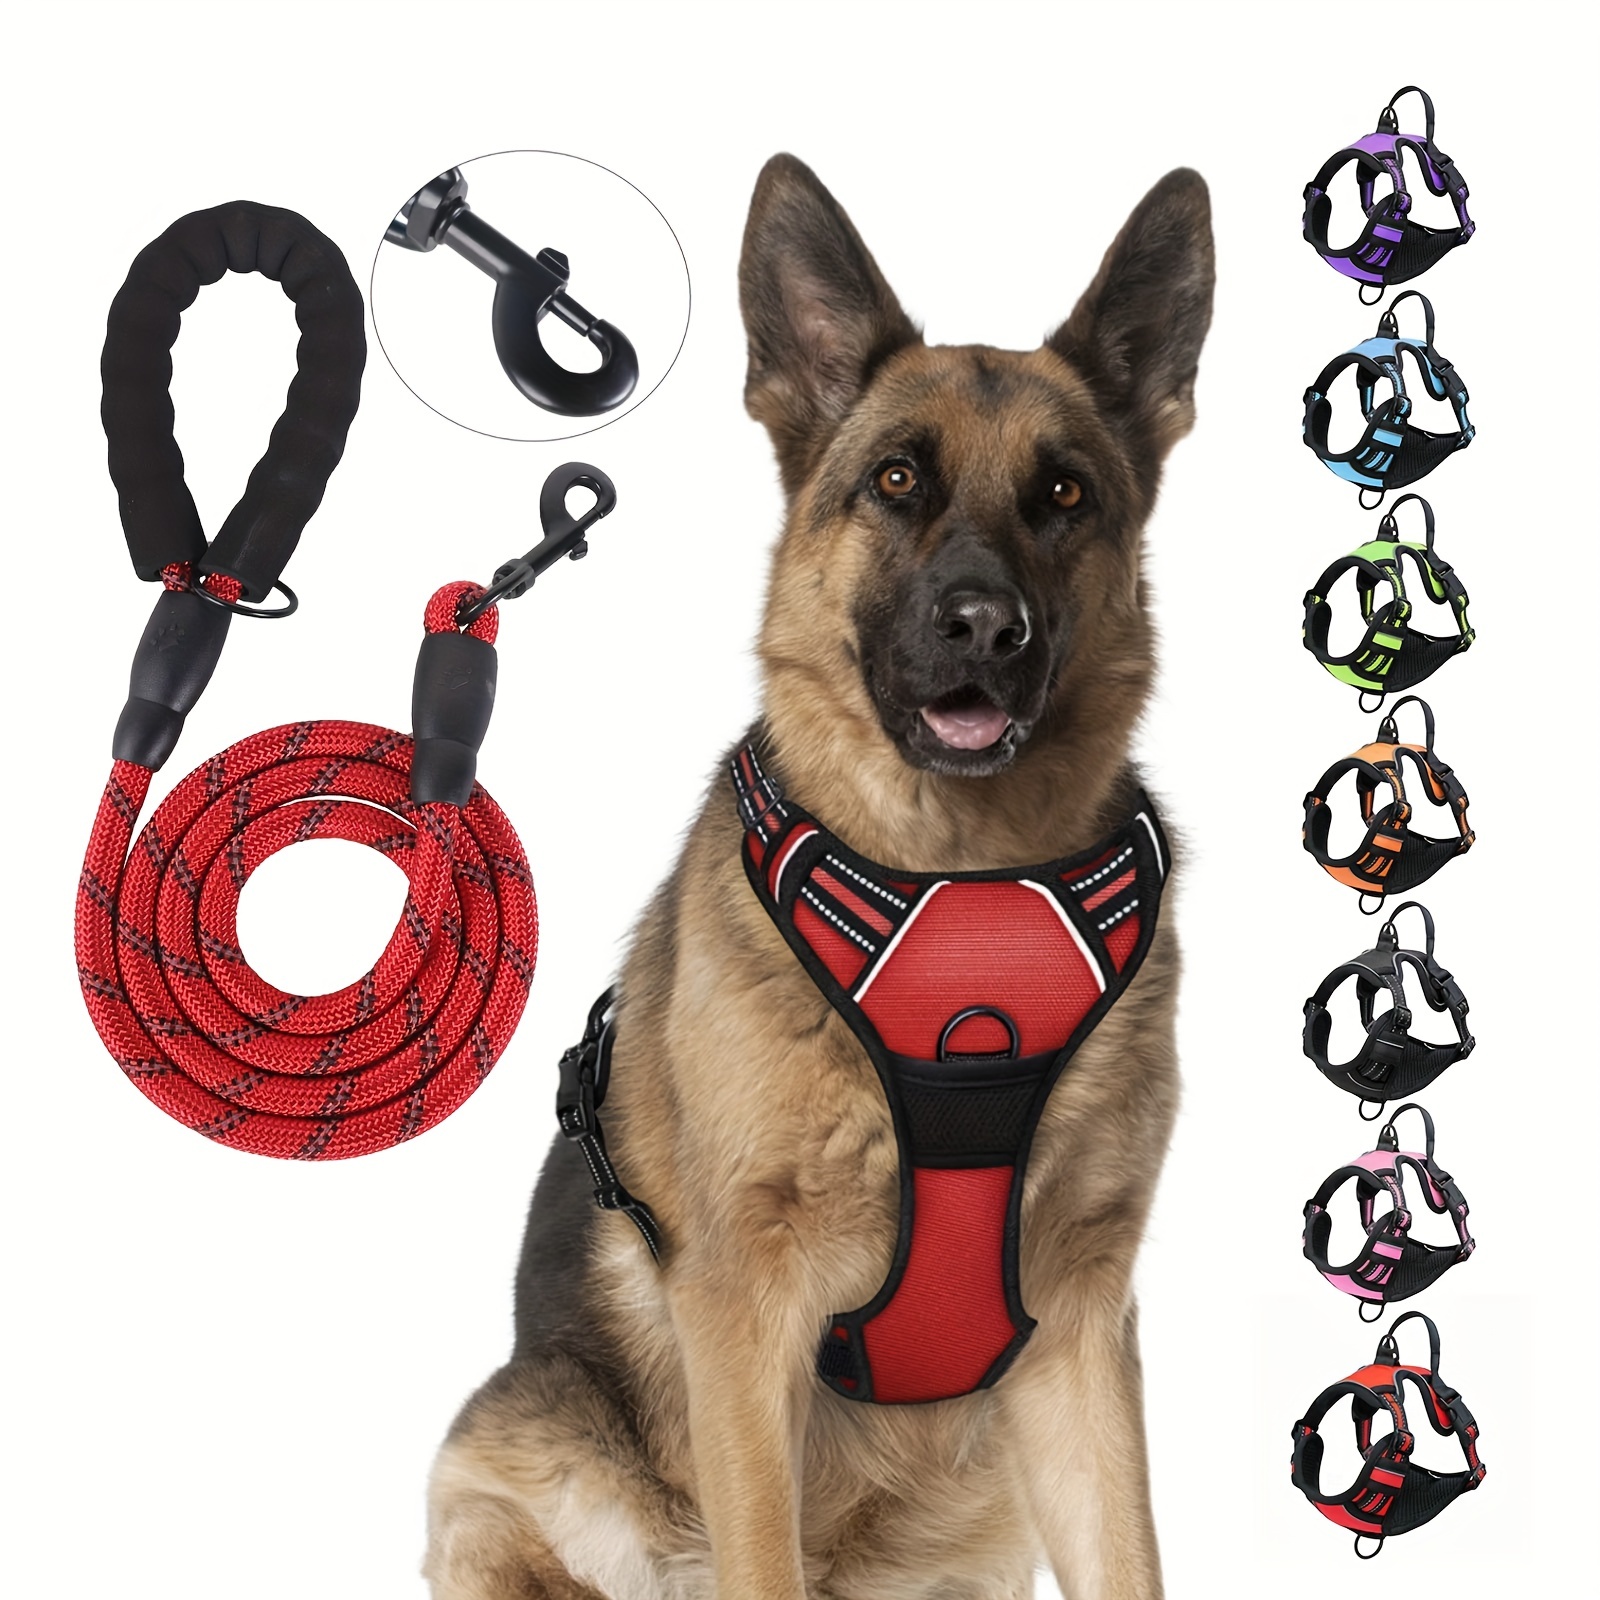 Reflective No-Pull Dog Harness and Leash Set - Adjustable Oxford Fabric  Vest for Easy Control - Ideal for Medium and Large Dogs Walking and Training